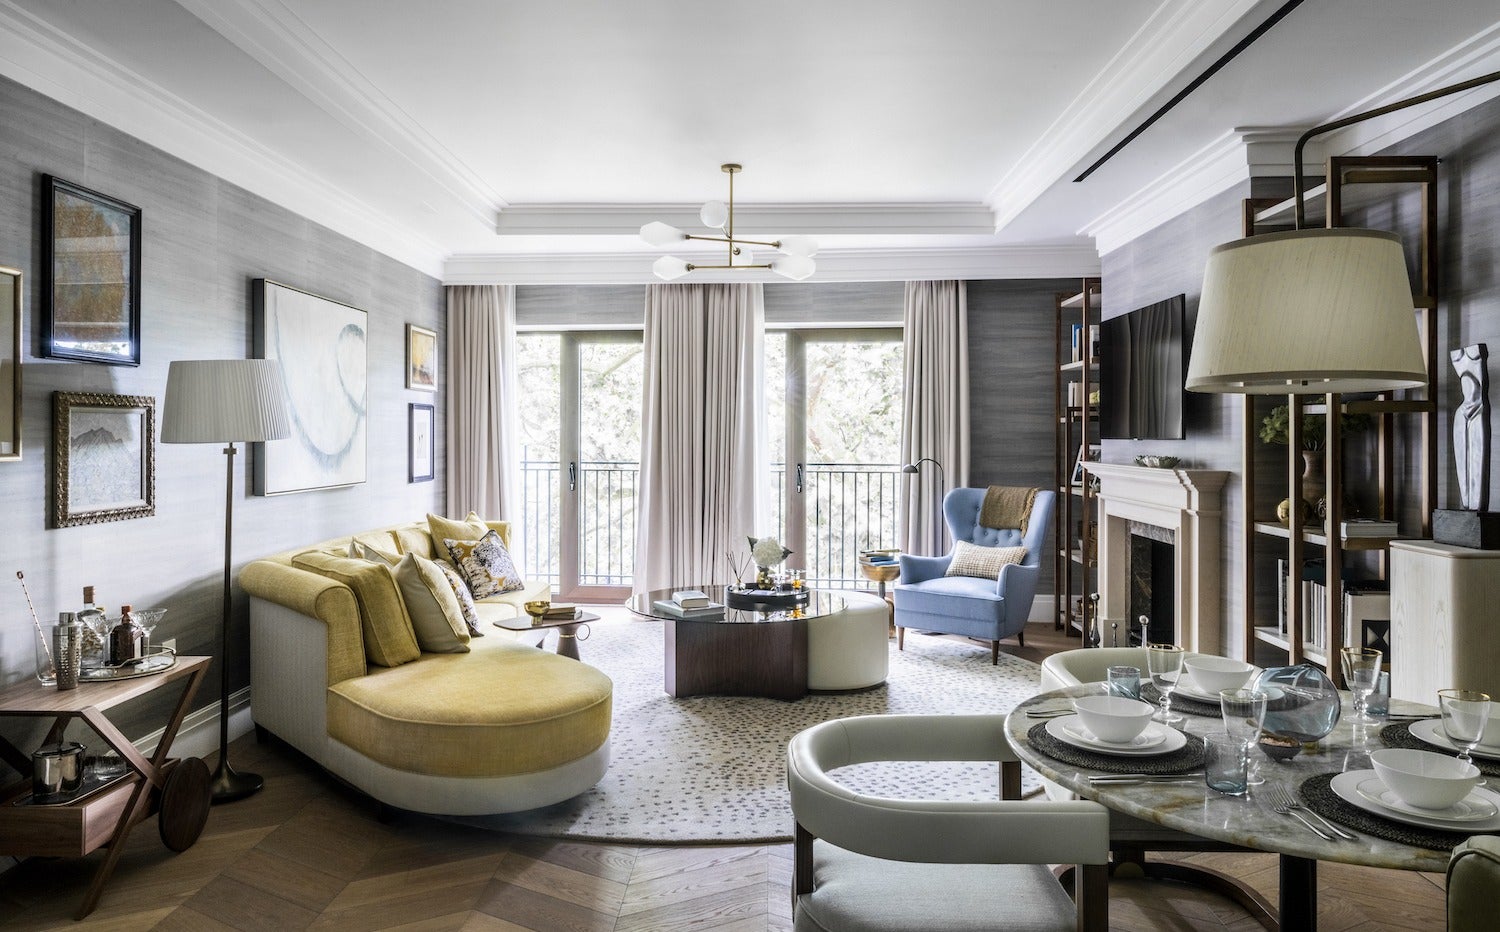 Auriens Chelsea aims to be the most luxe of later living options for London's affluent